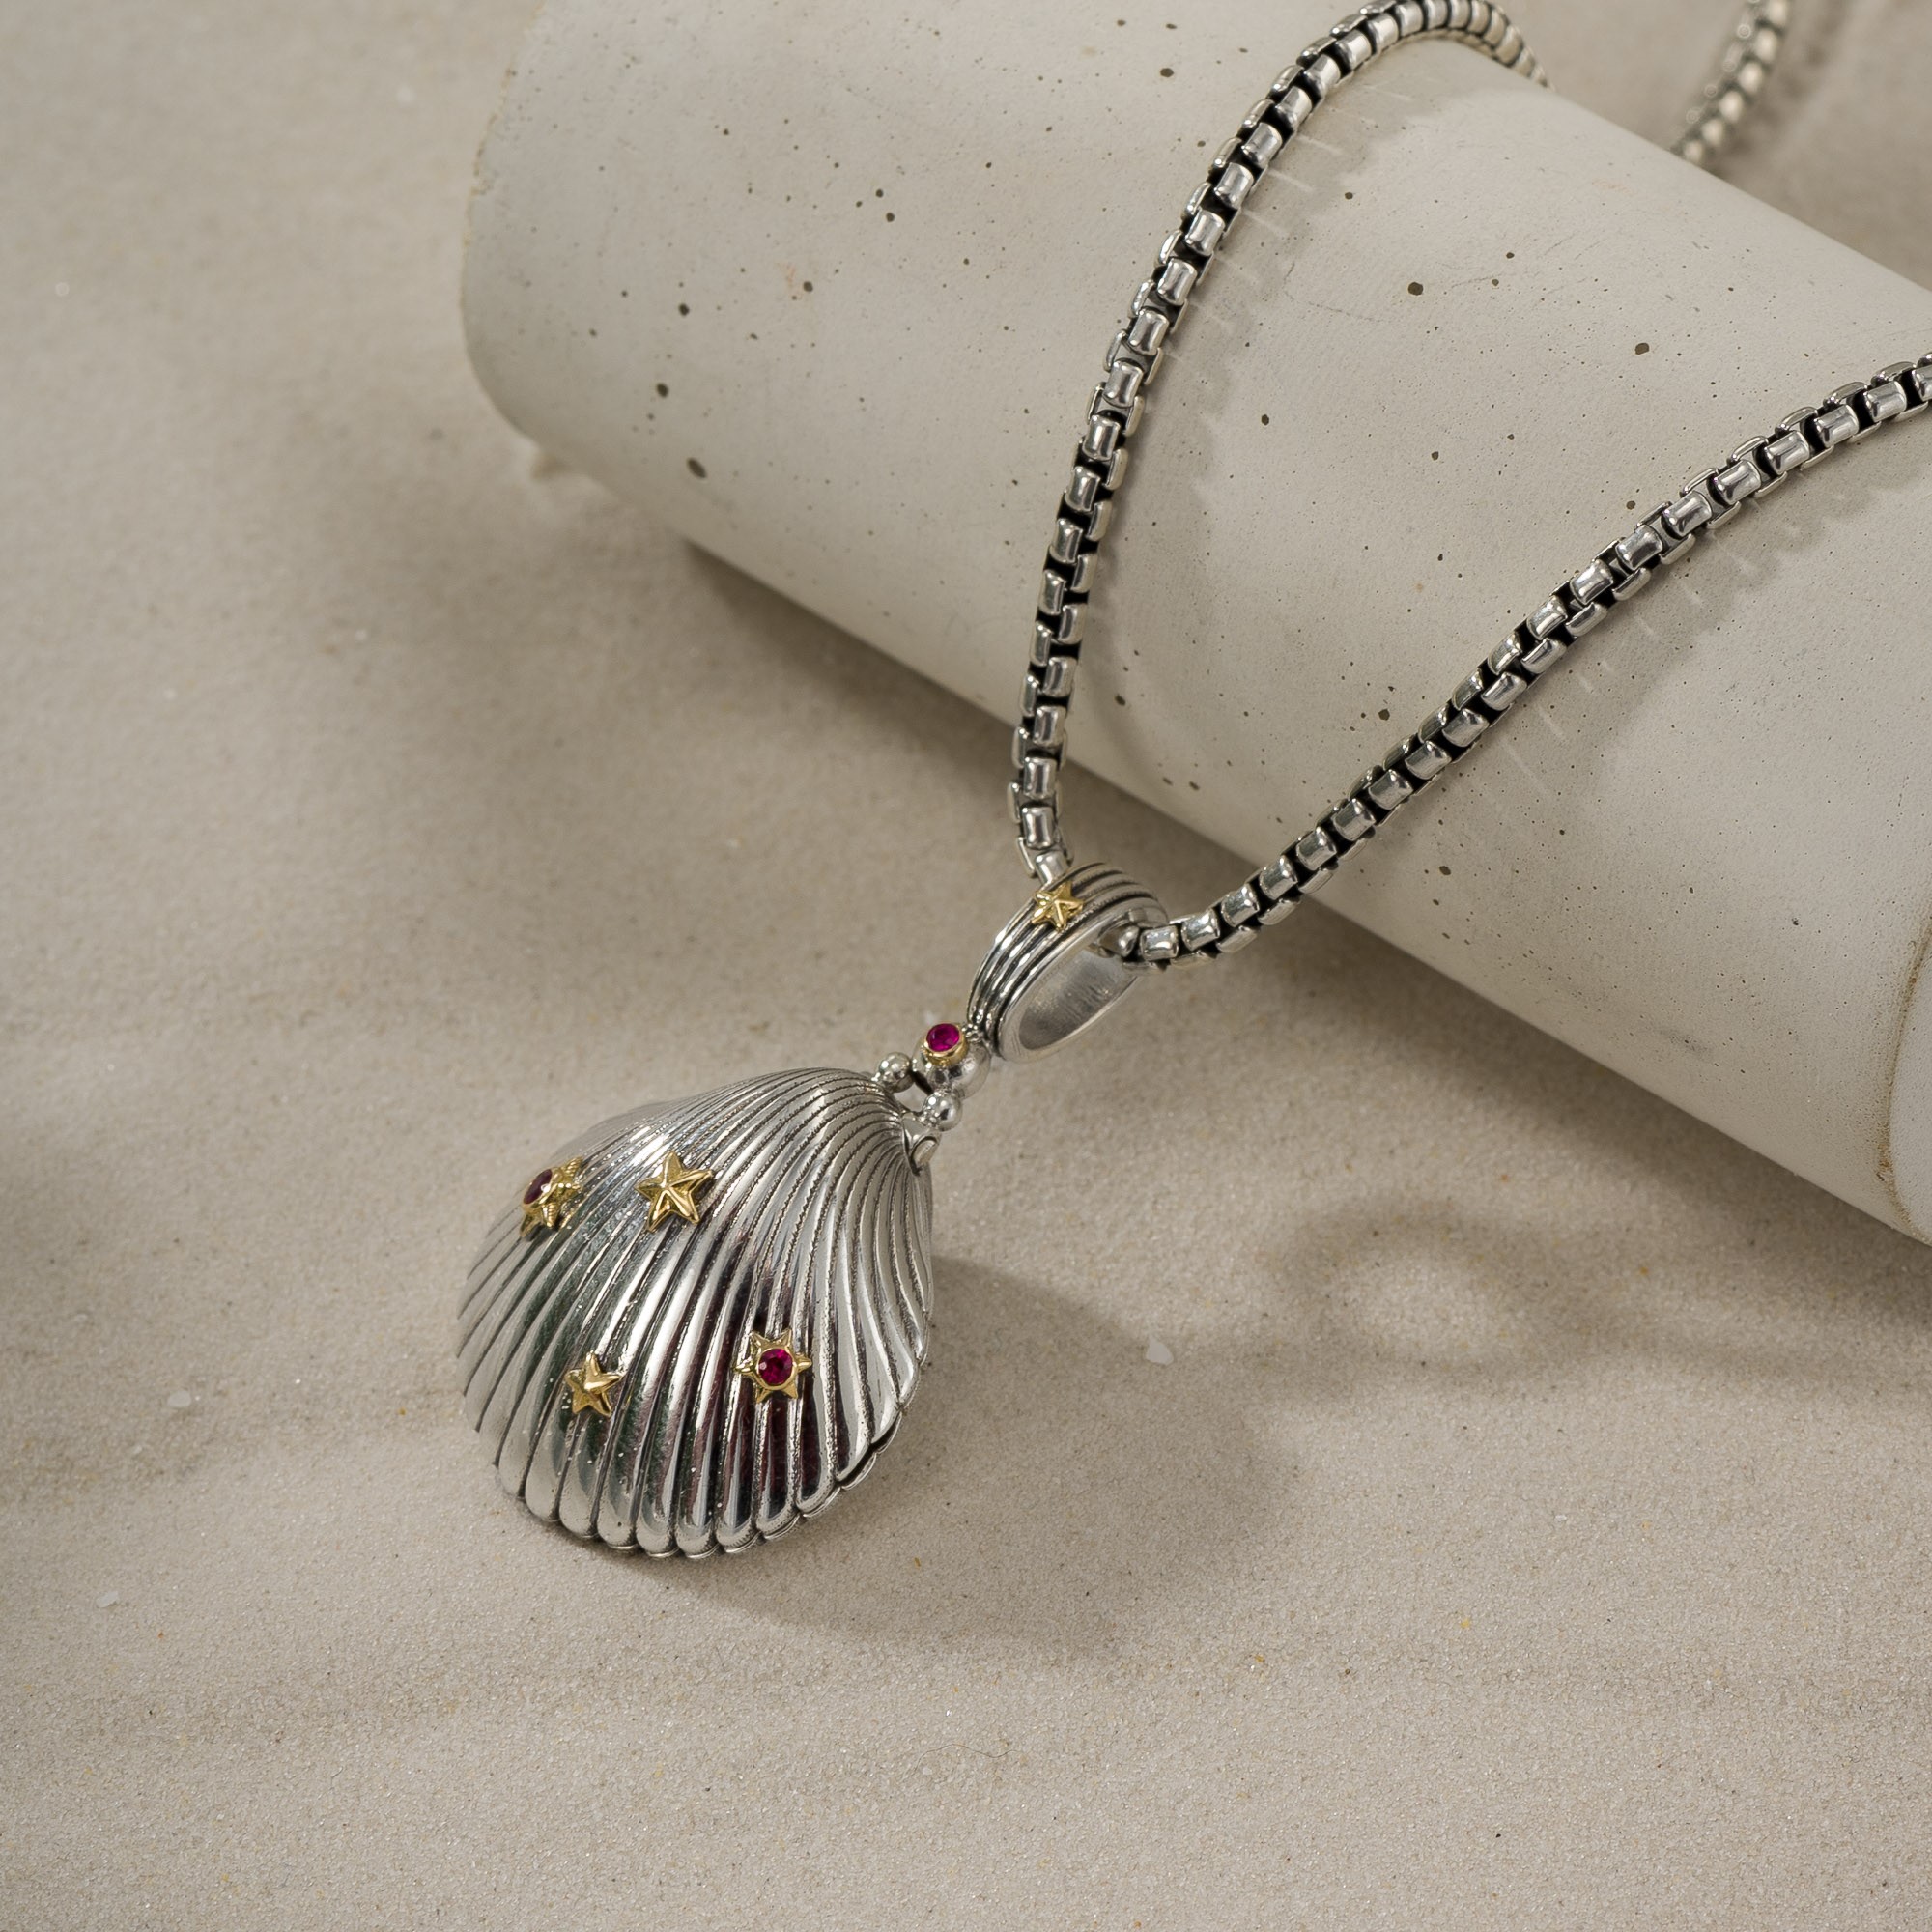 Sea Shell Locket Pendant in Sterling Silver with Details in 18K Gold and Precious Stones